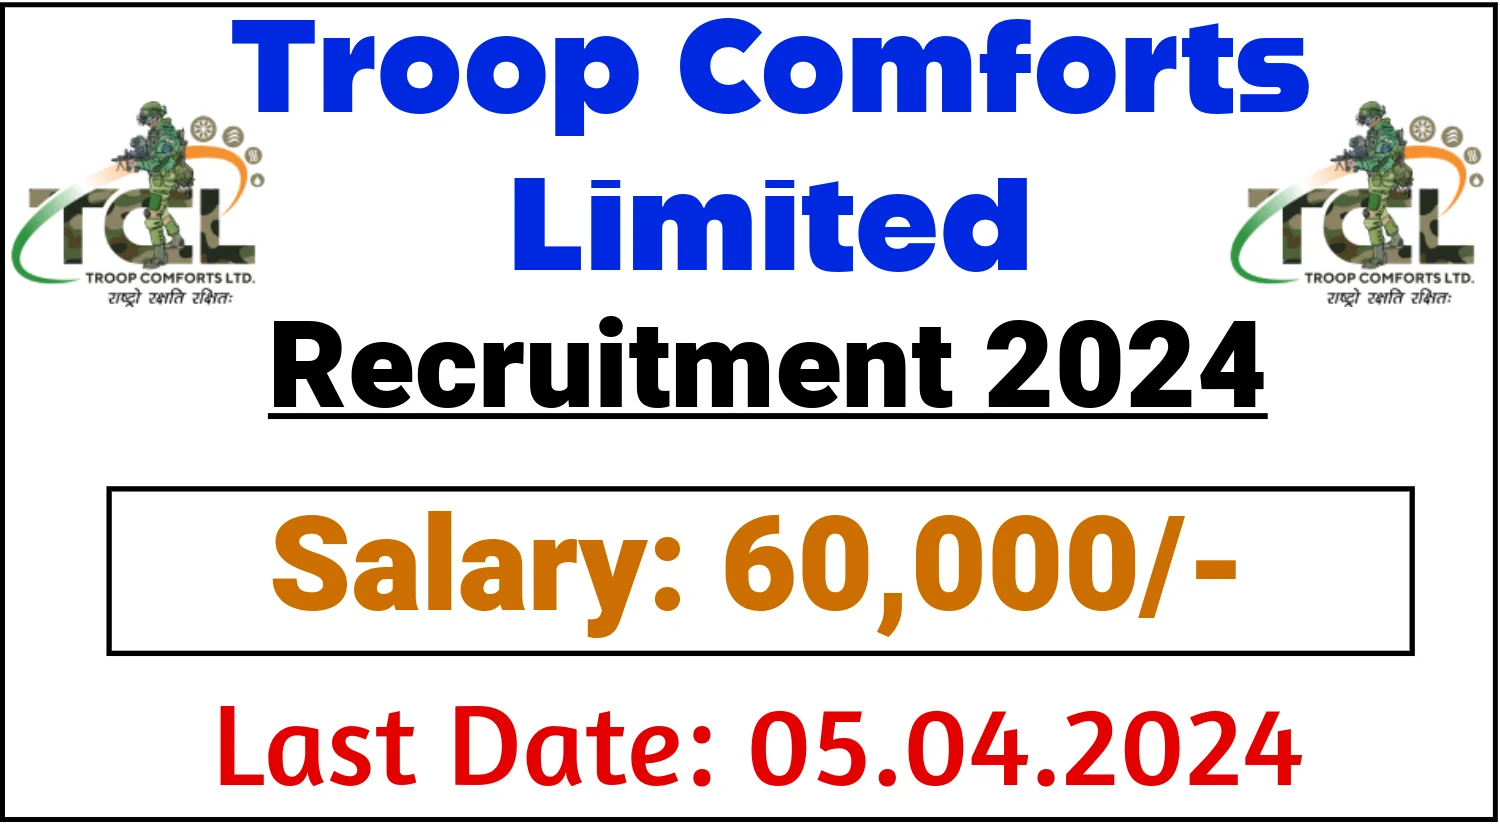 Troop Comforts Limited Recruitment 2024